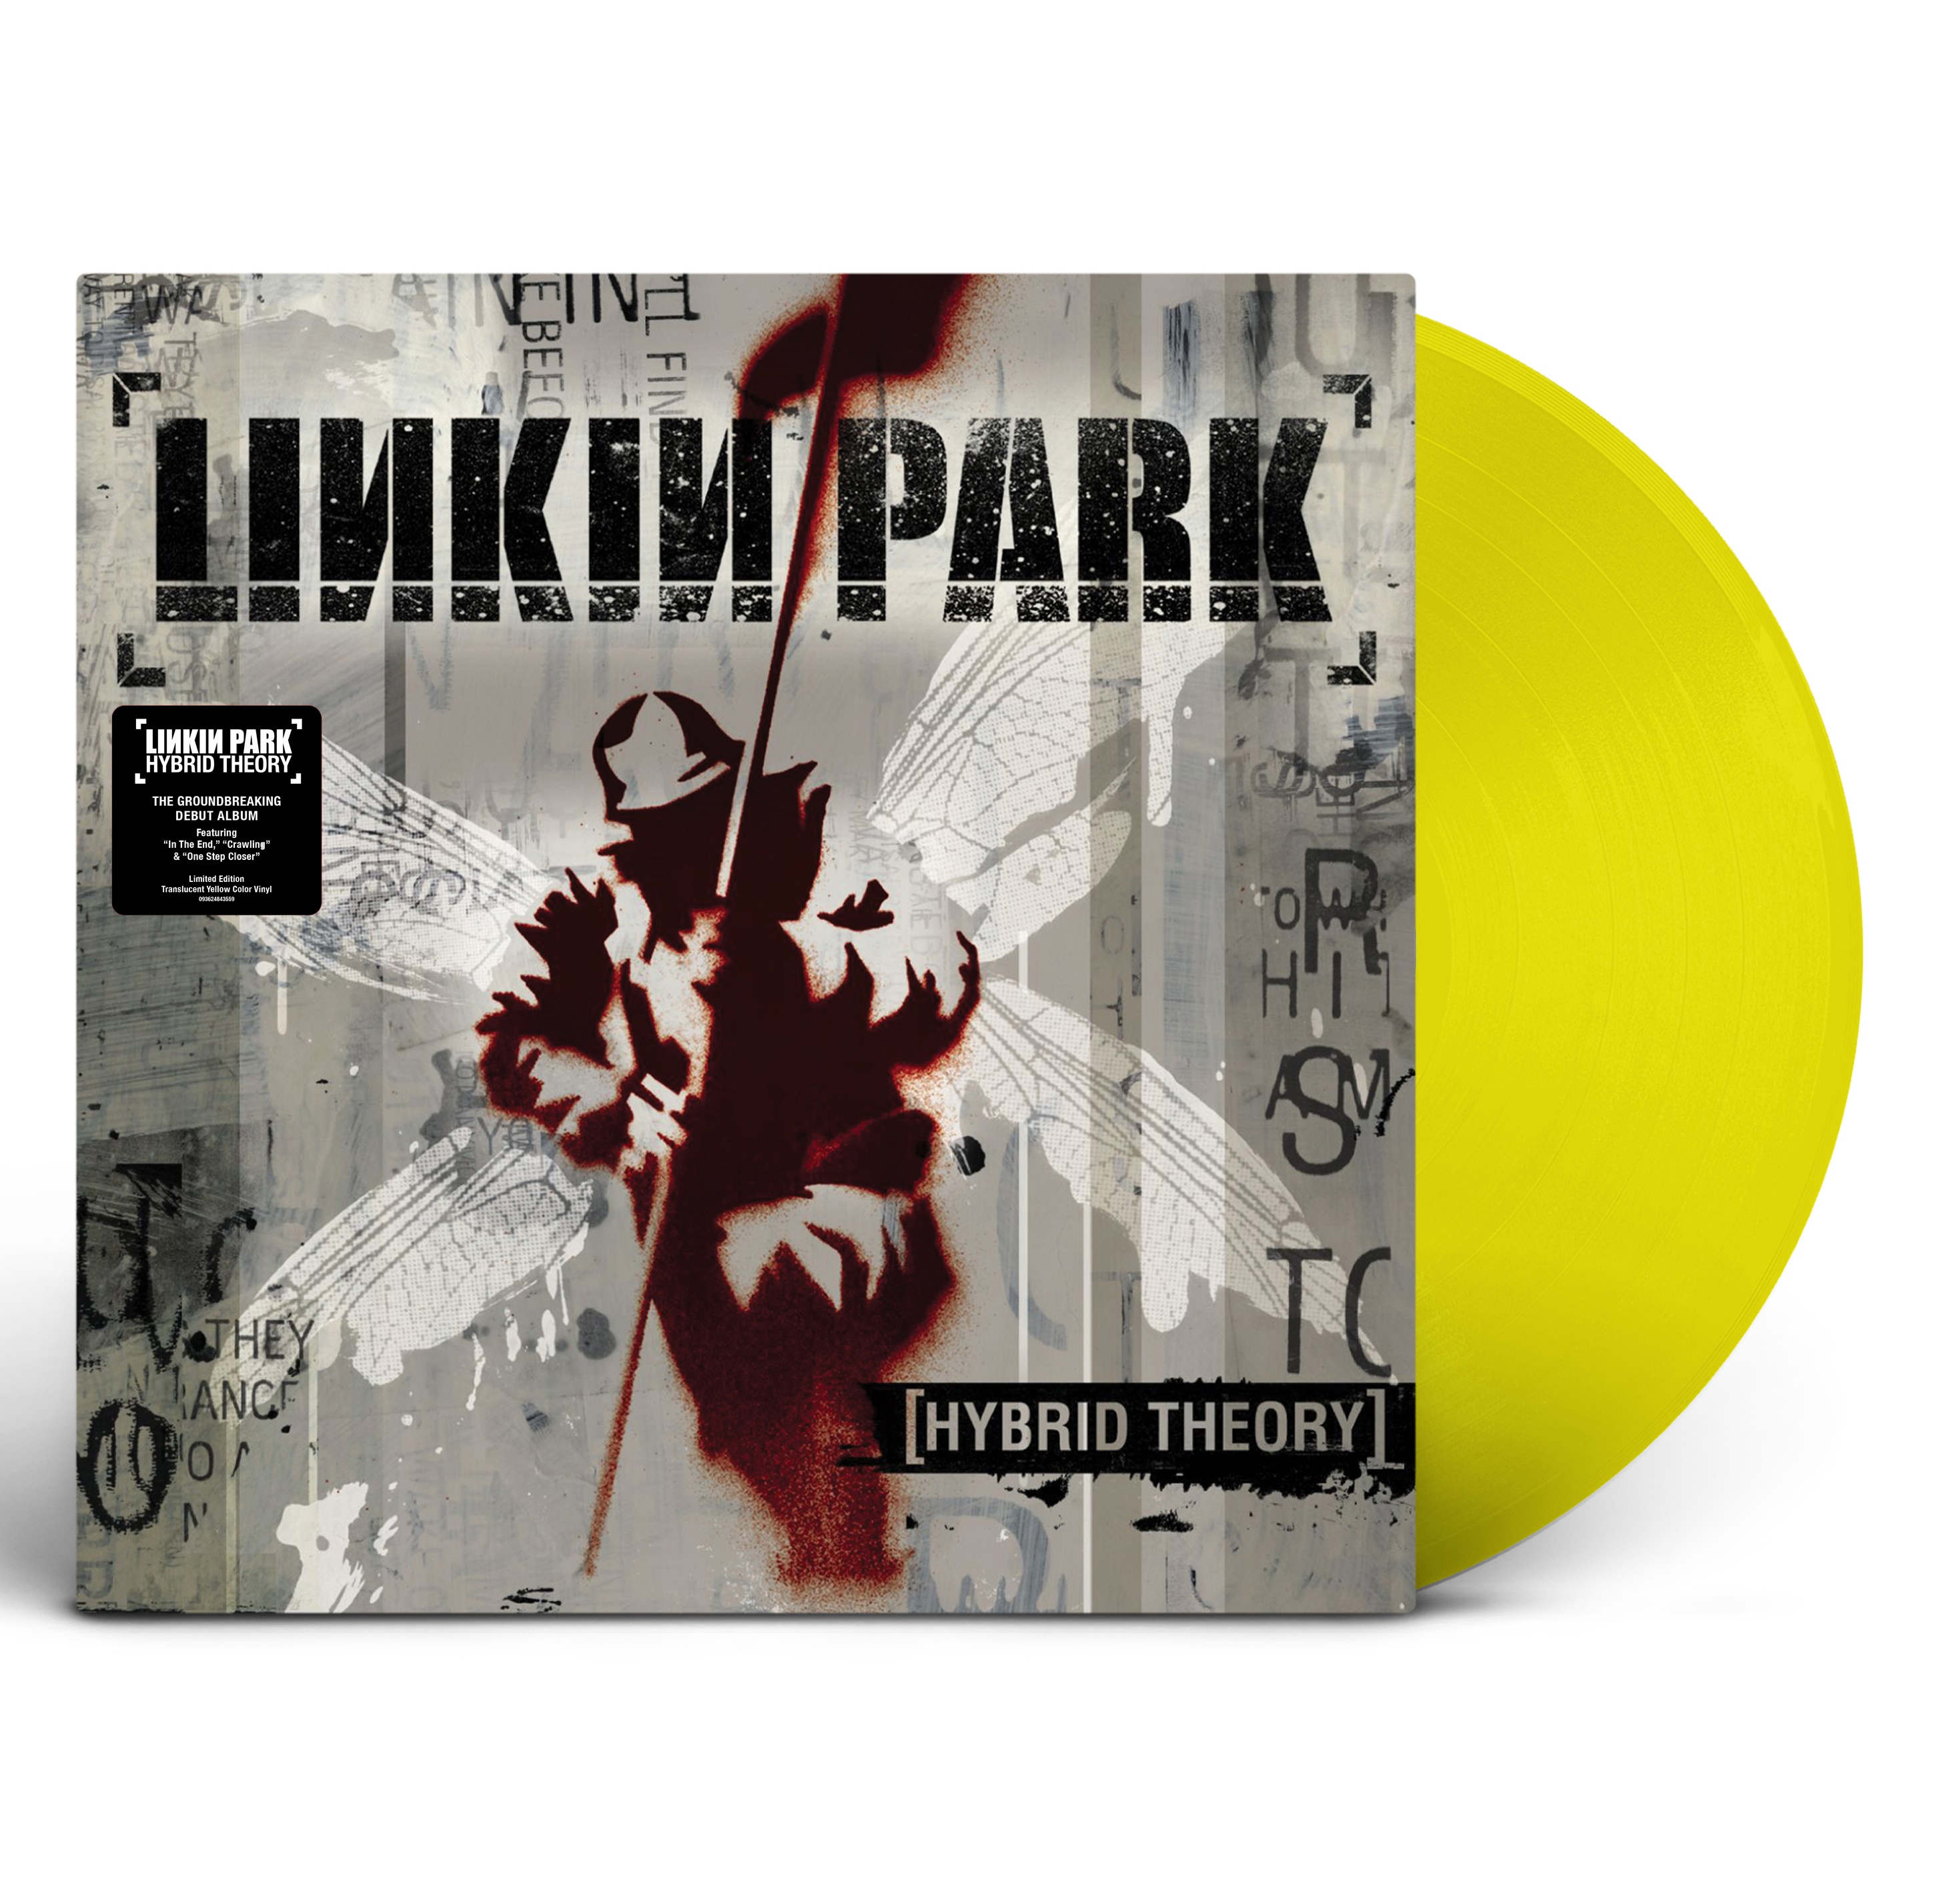 View All – Linkin Park Store